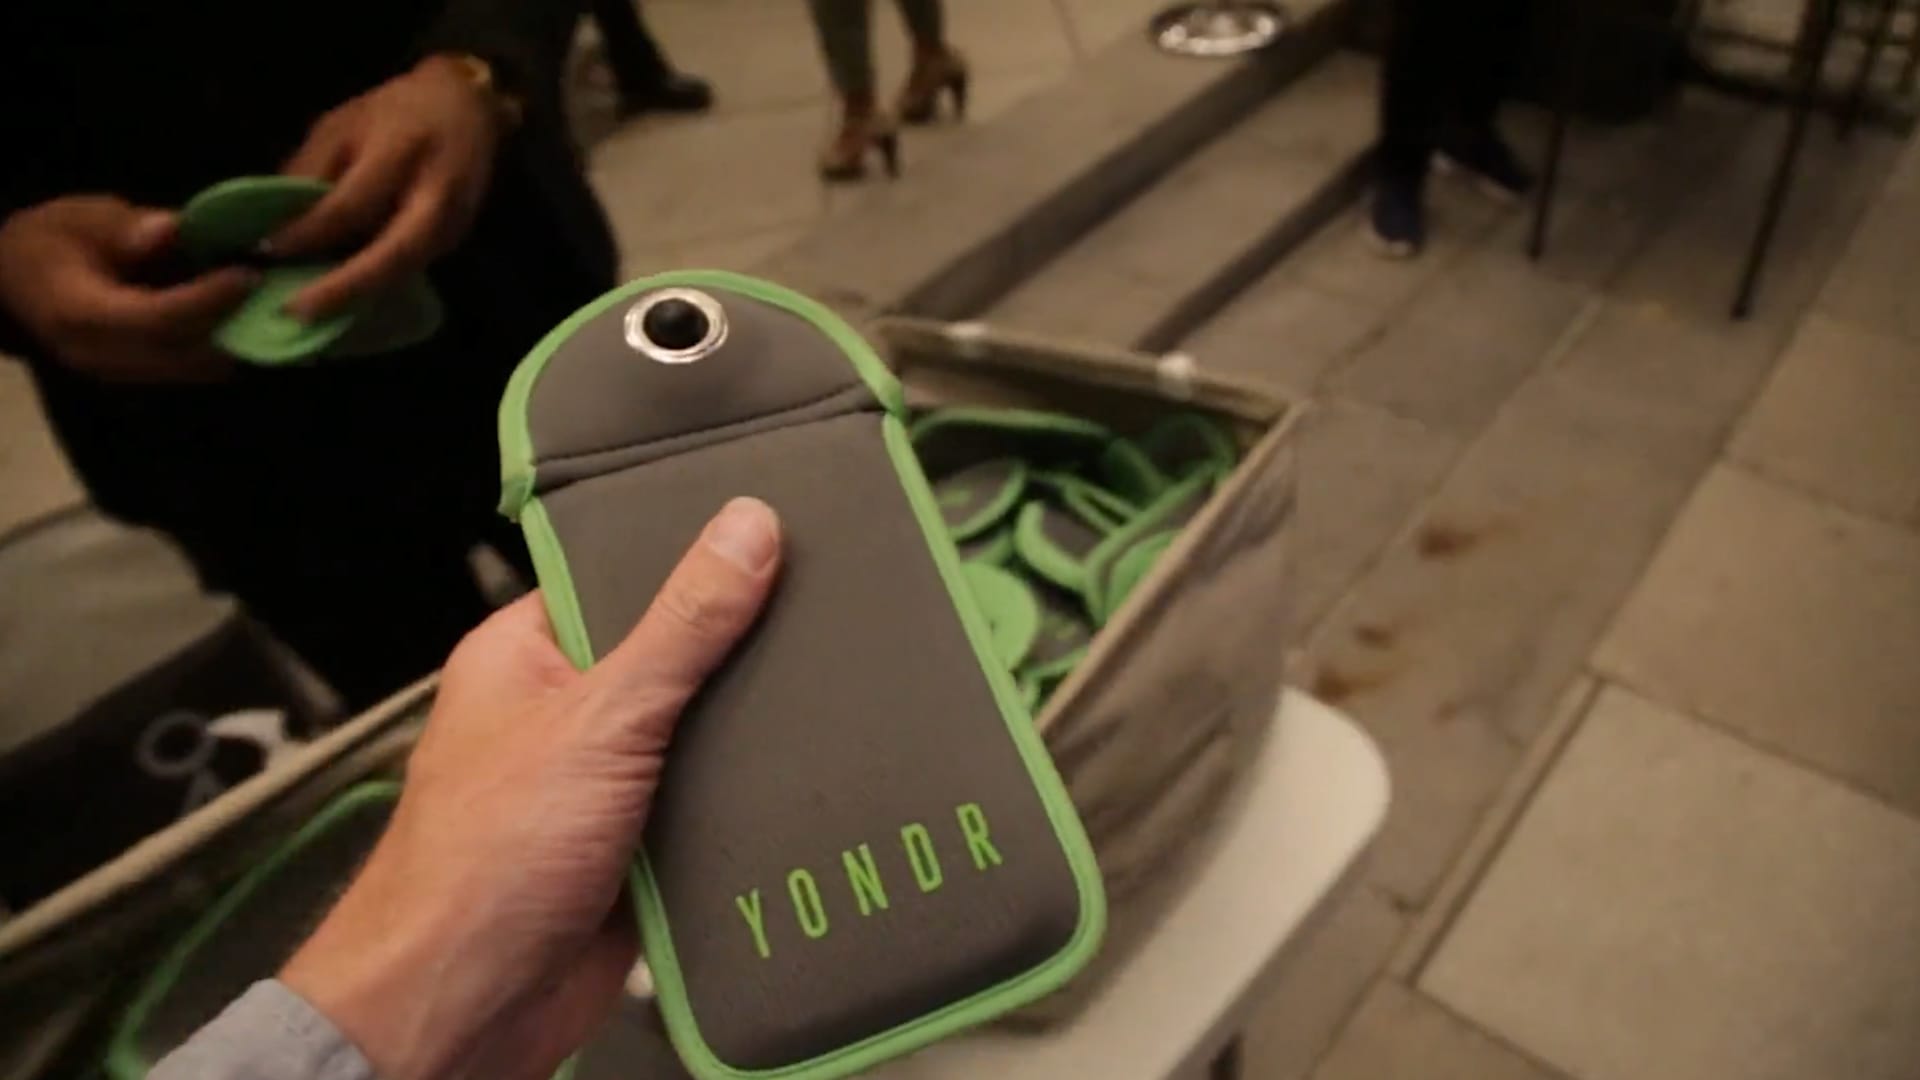 Yondr's magnetic locking smartphone pouches gaining steam with schools to  improve grades, behavior, and student interaction - 9to5Mac